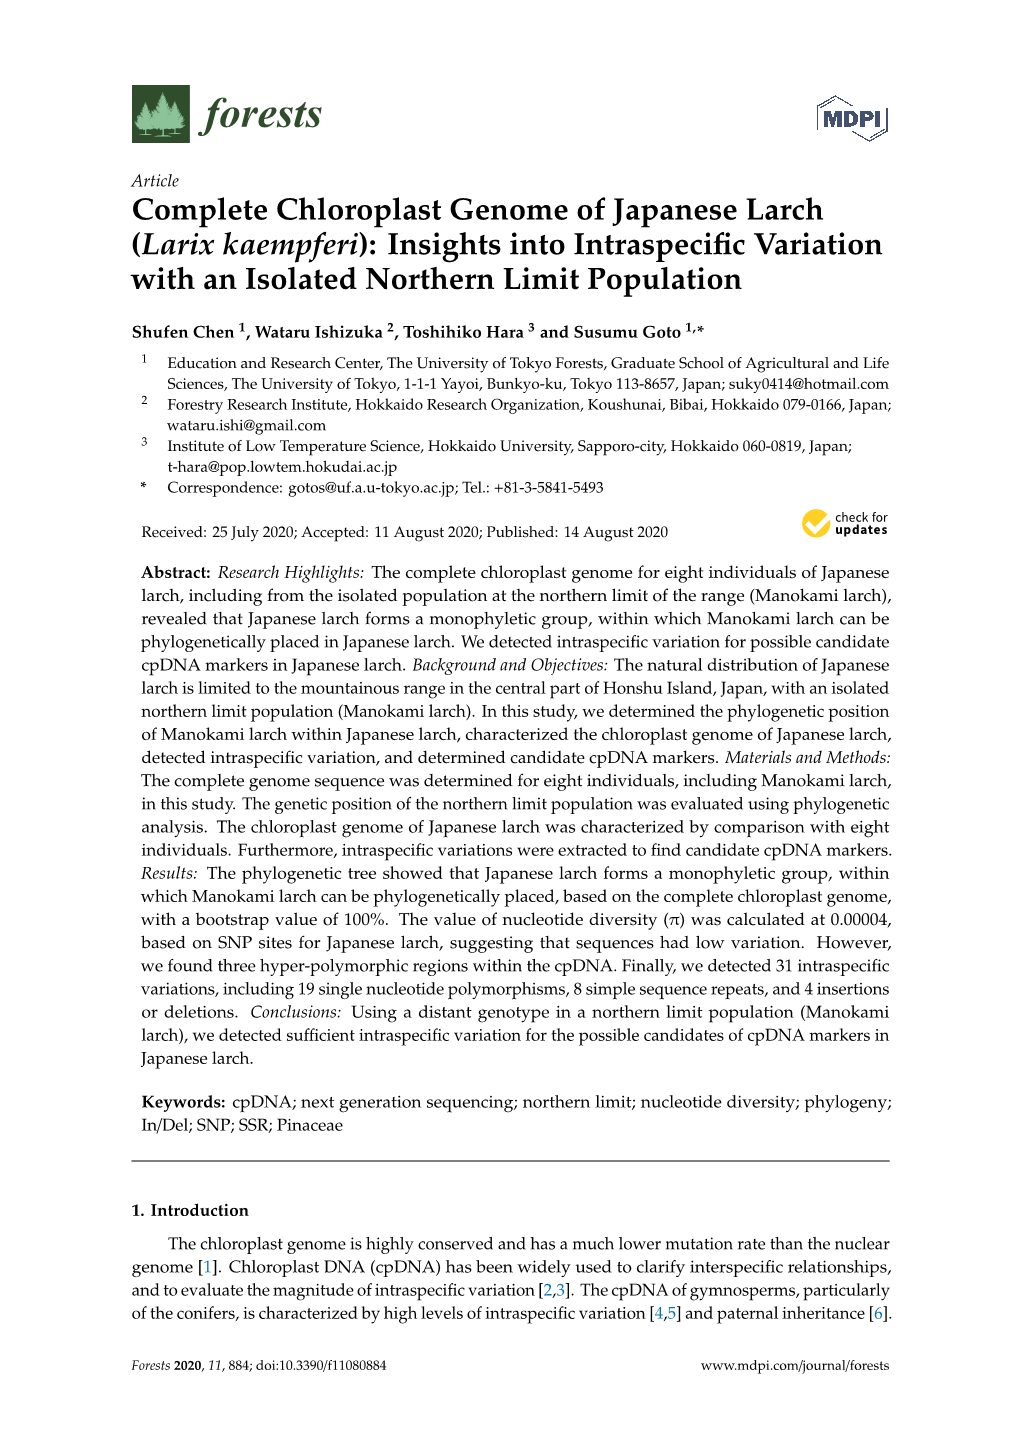 Complete Chloroplast Genome of Japanese Larch (Larix Kaempferi): Insights Into Intraspeciﬁc Variation with an Isolated Northern Limit Population